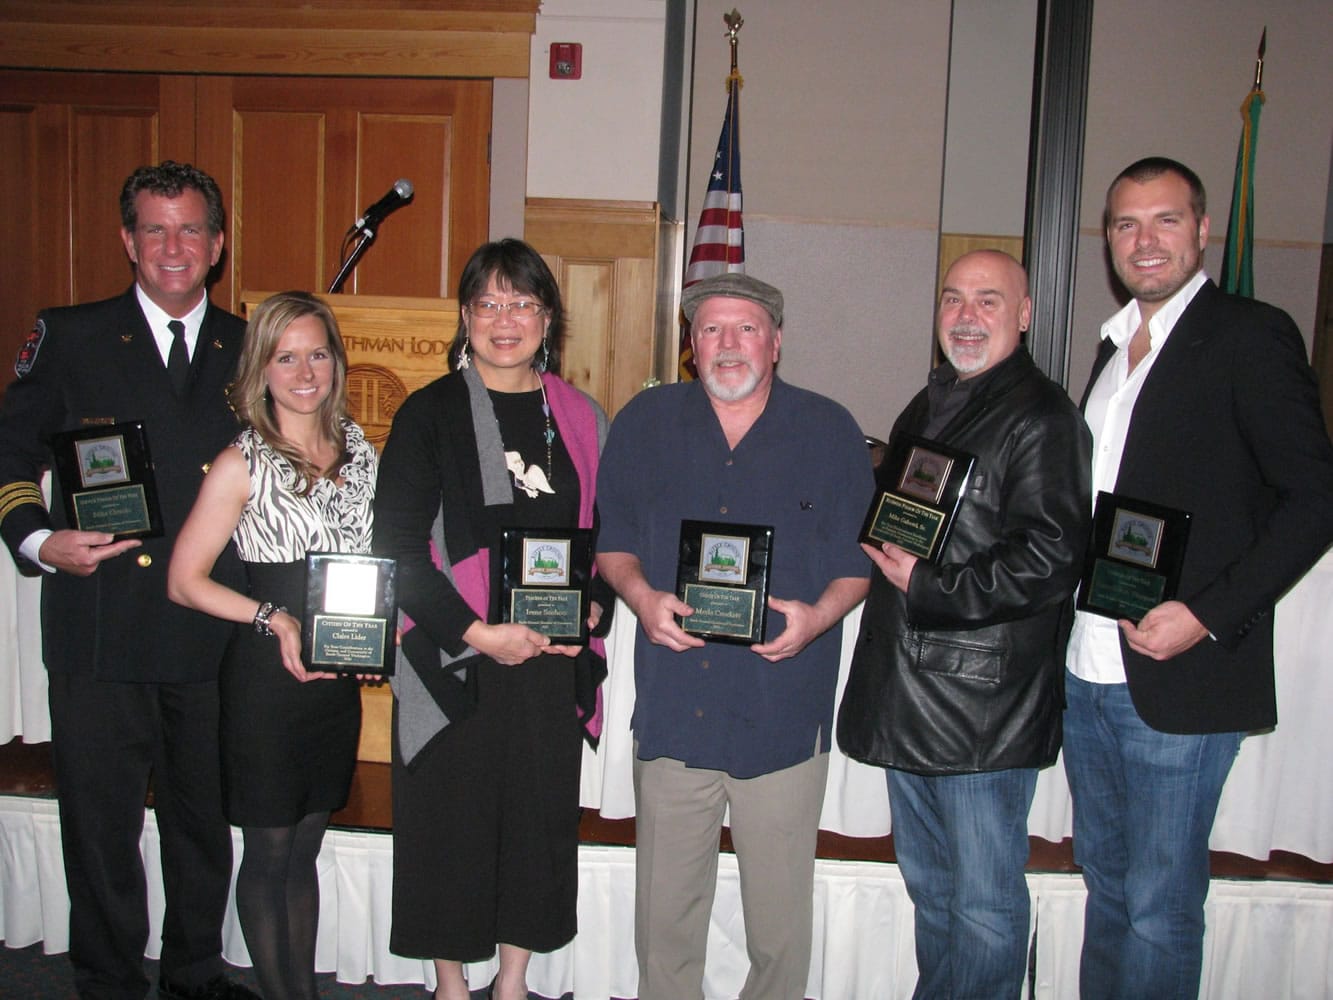 Battle Ground: The Battle Ground Chamber of Commerce recognized 6 individuals at the 2011 recognition banquet.